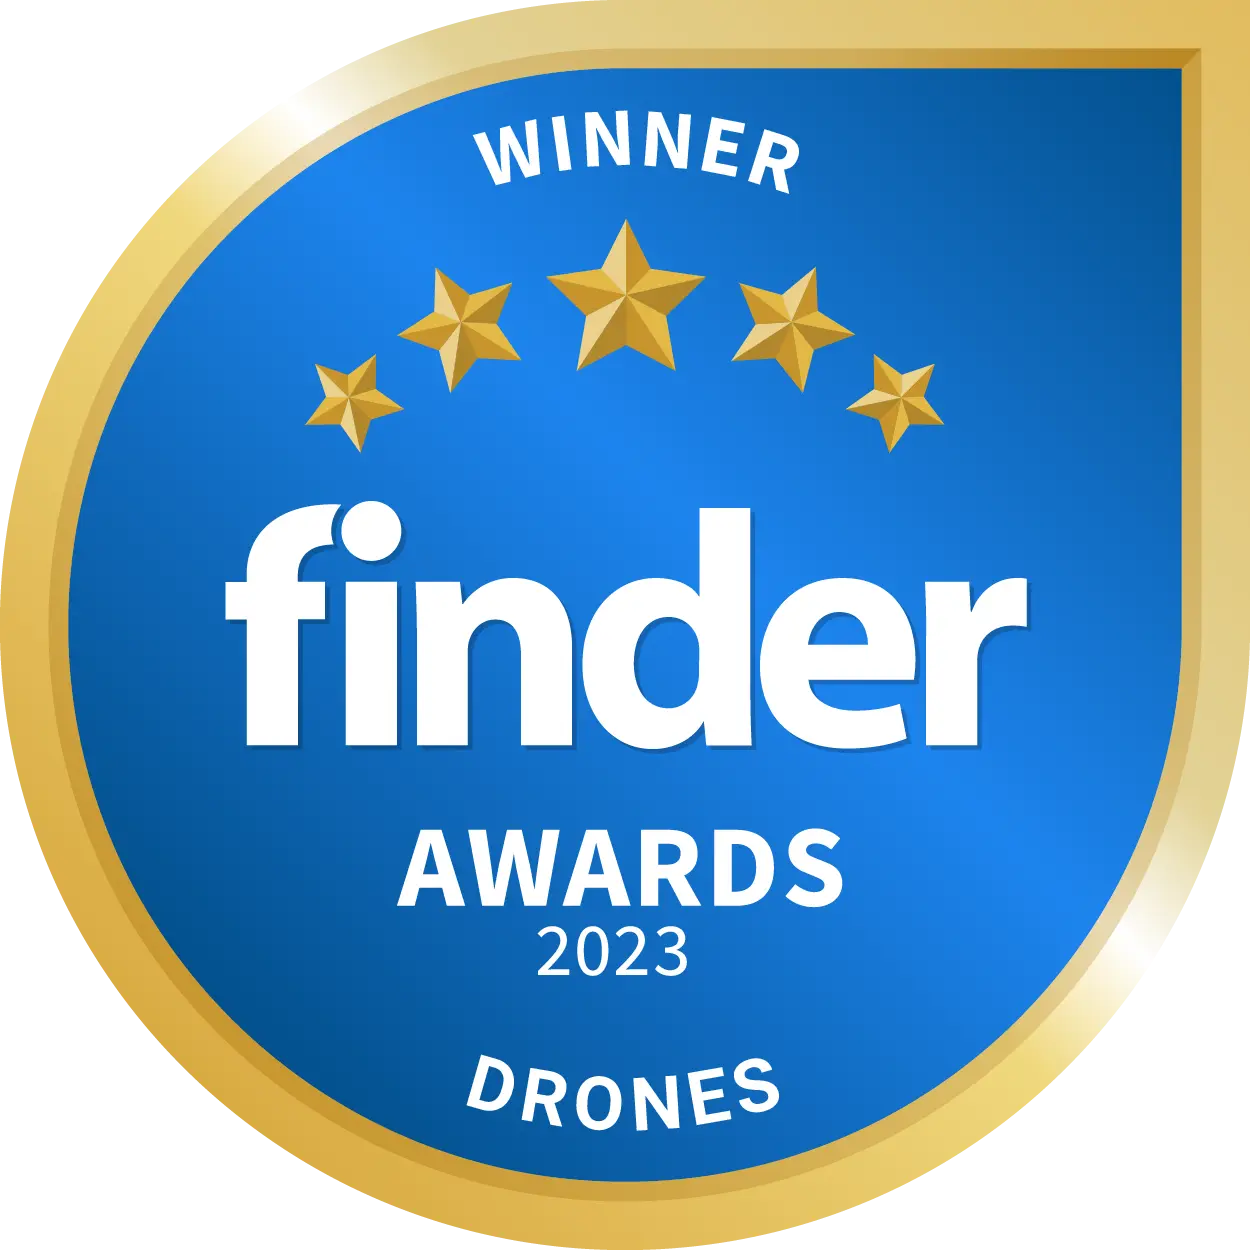 Best-rated drone brand